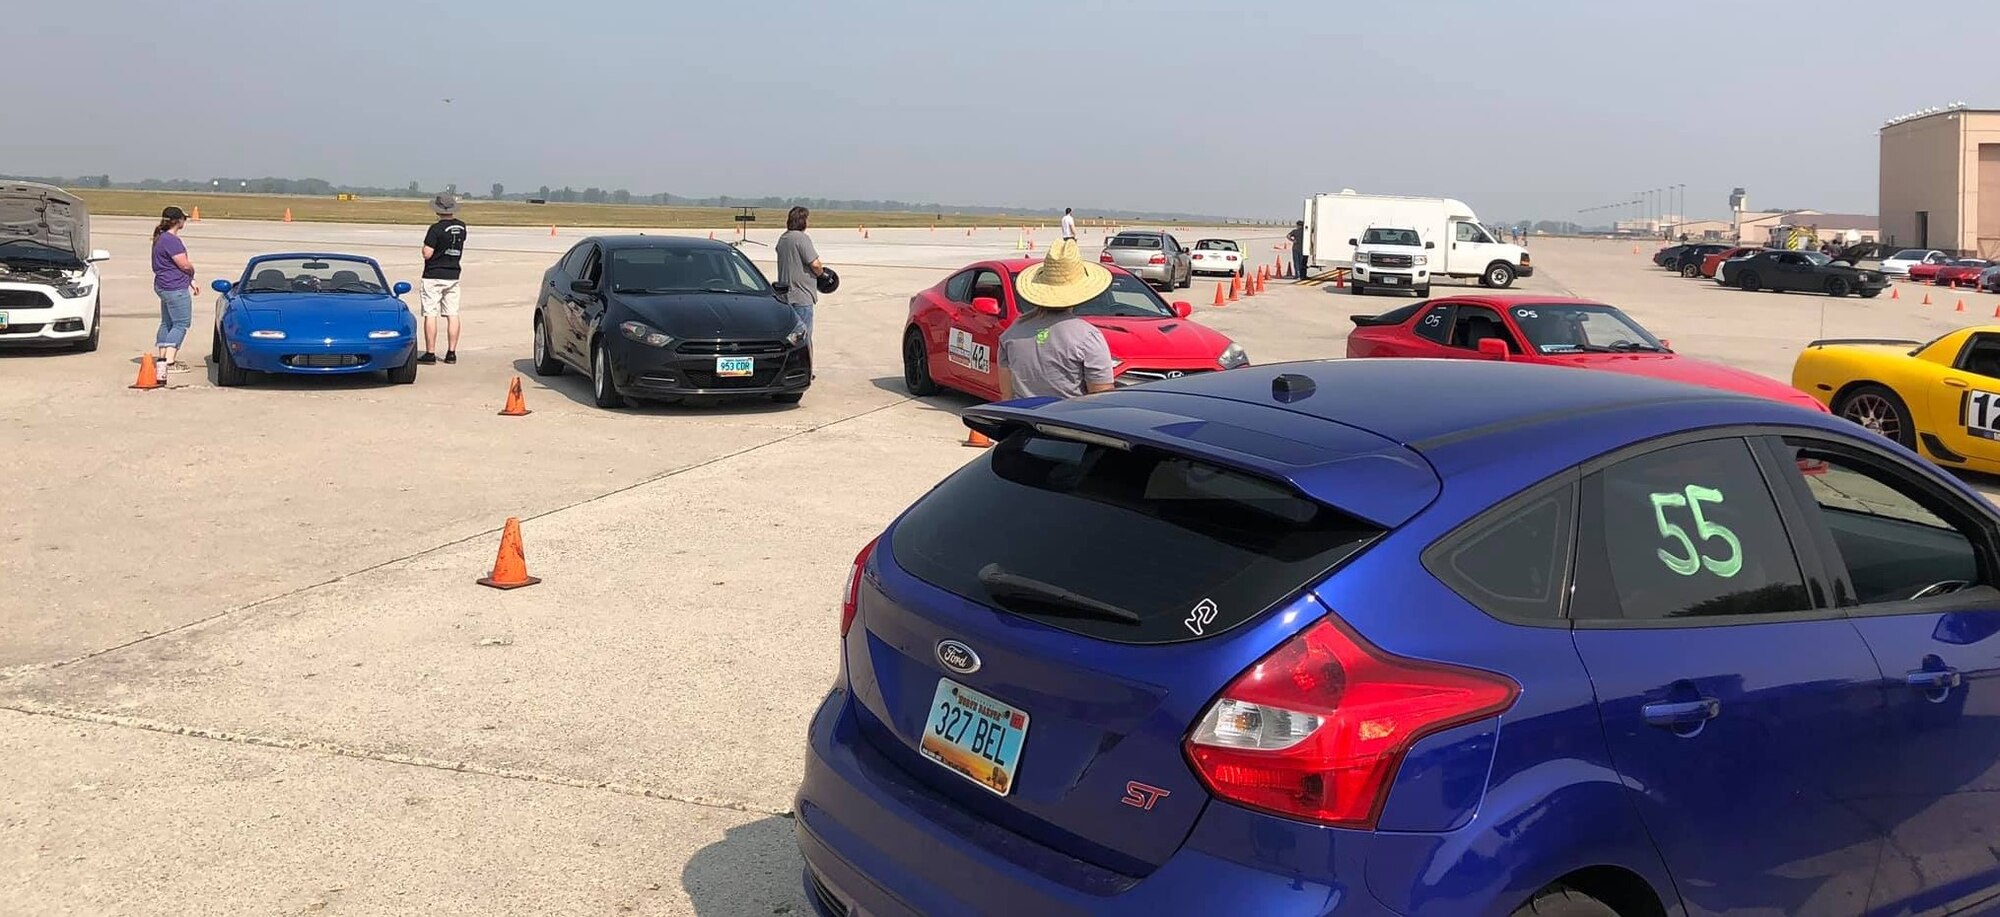 Sports cars are parked in front of a hanger on the flight line.